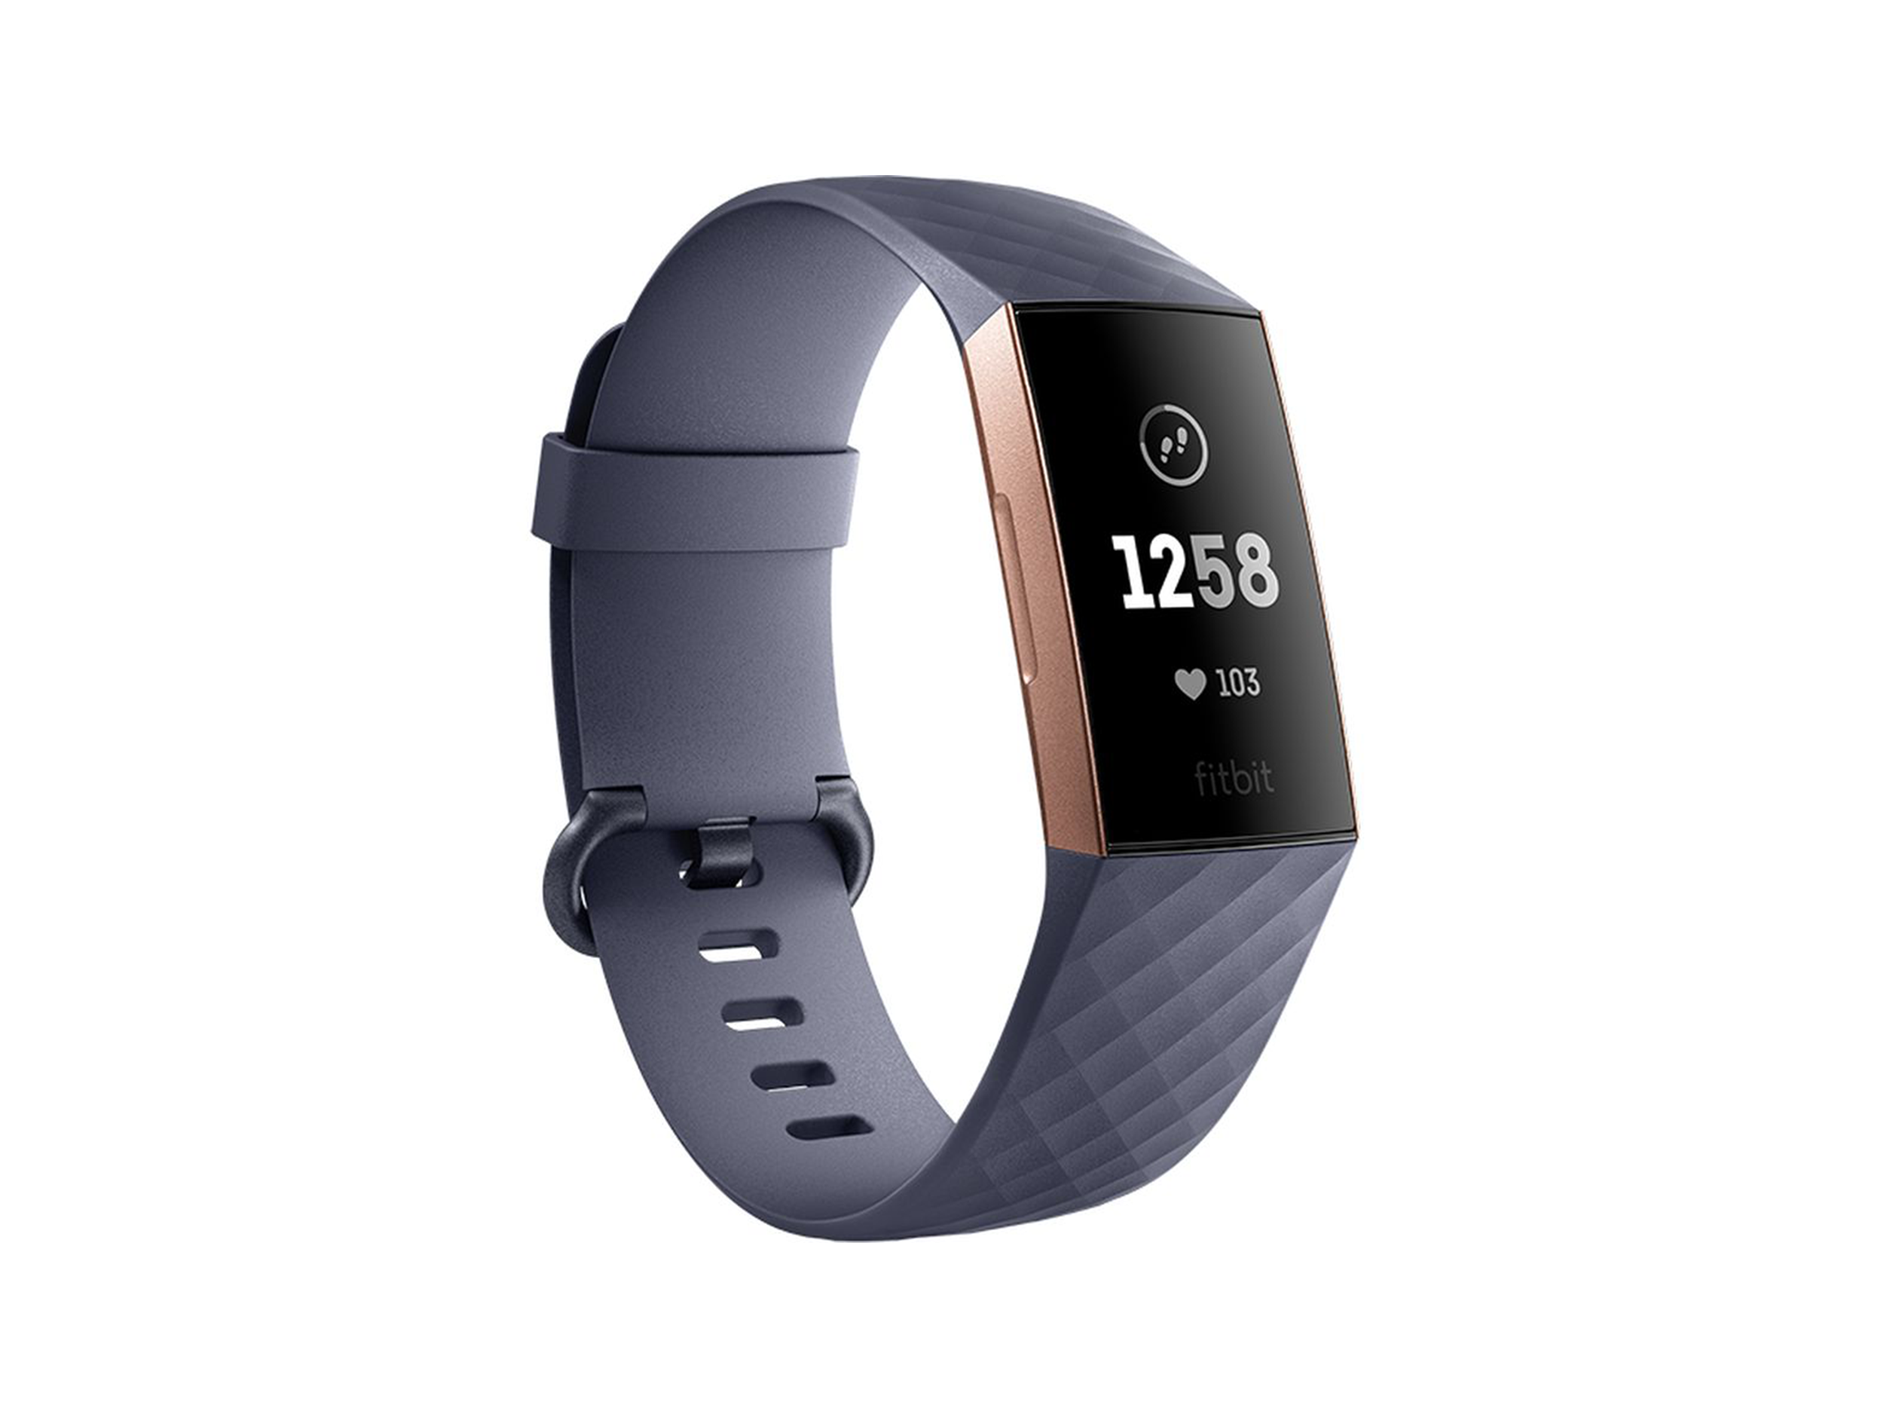 fitbit for women's health